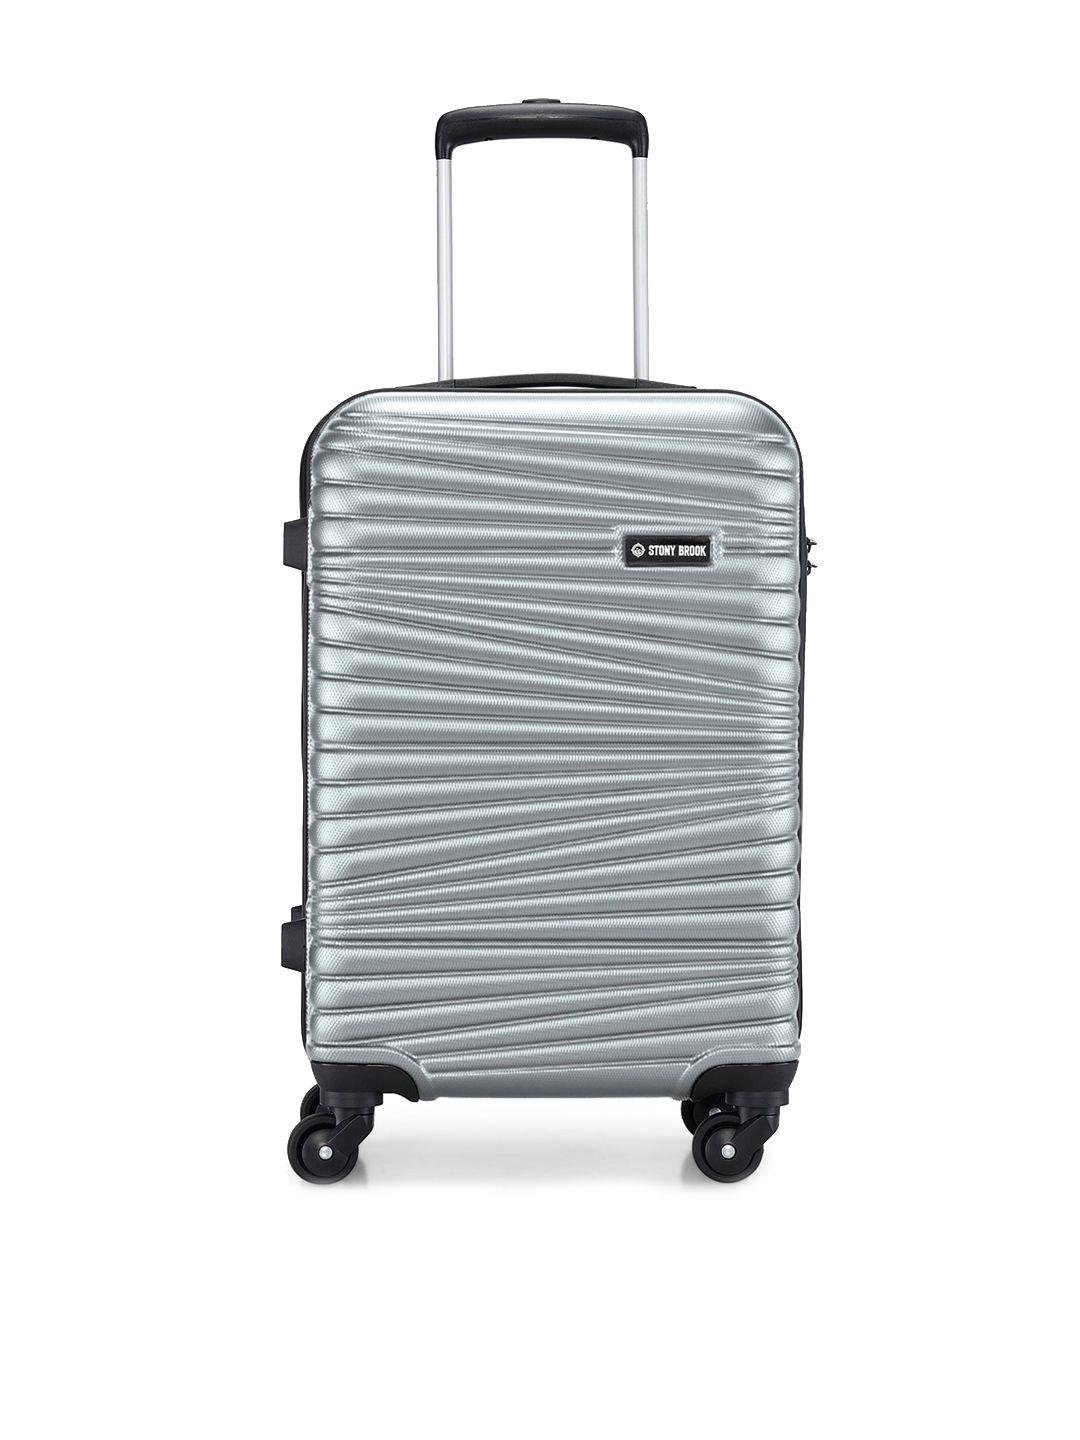 stony brook by nasher miles textured hard-sided cabin trolley suitcase